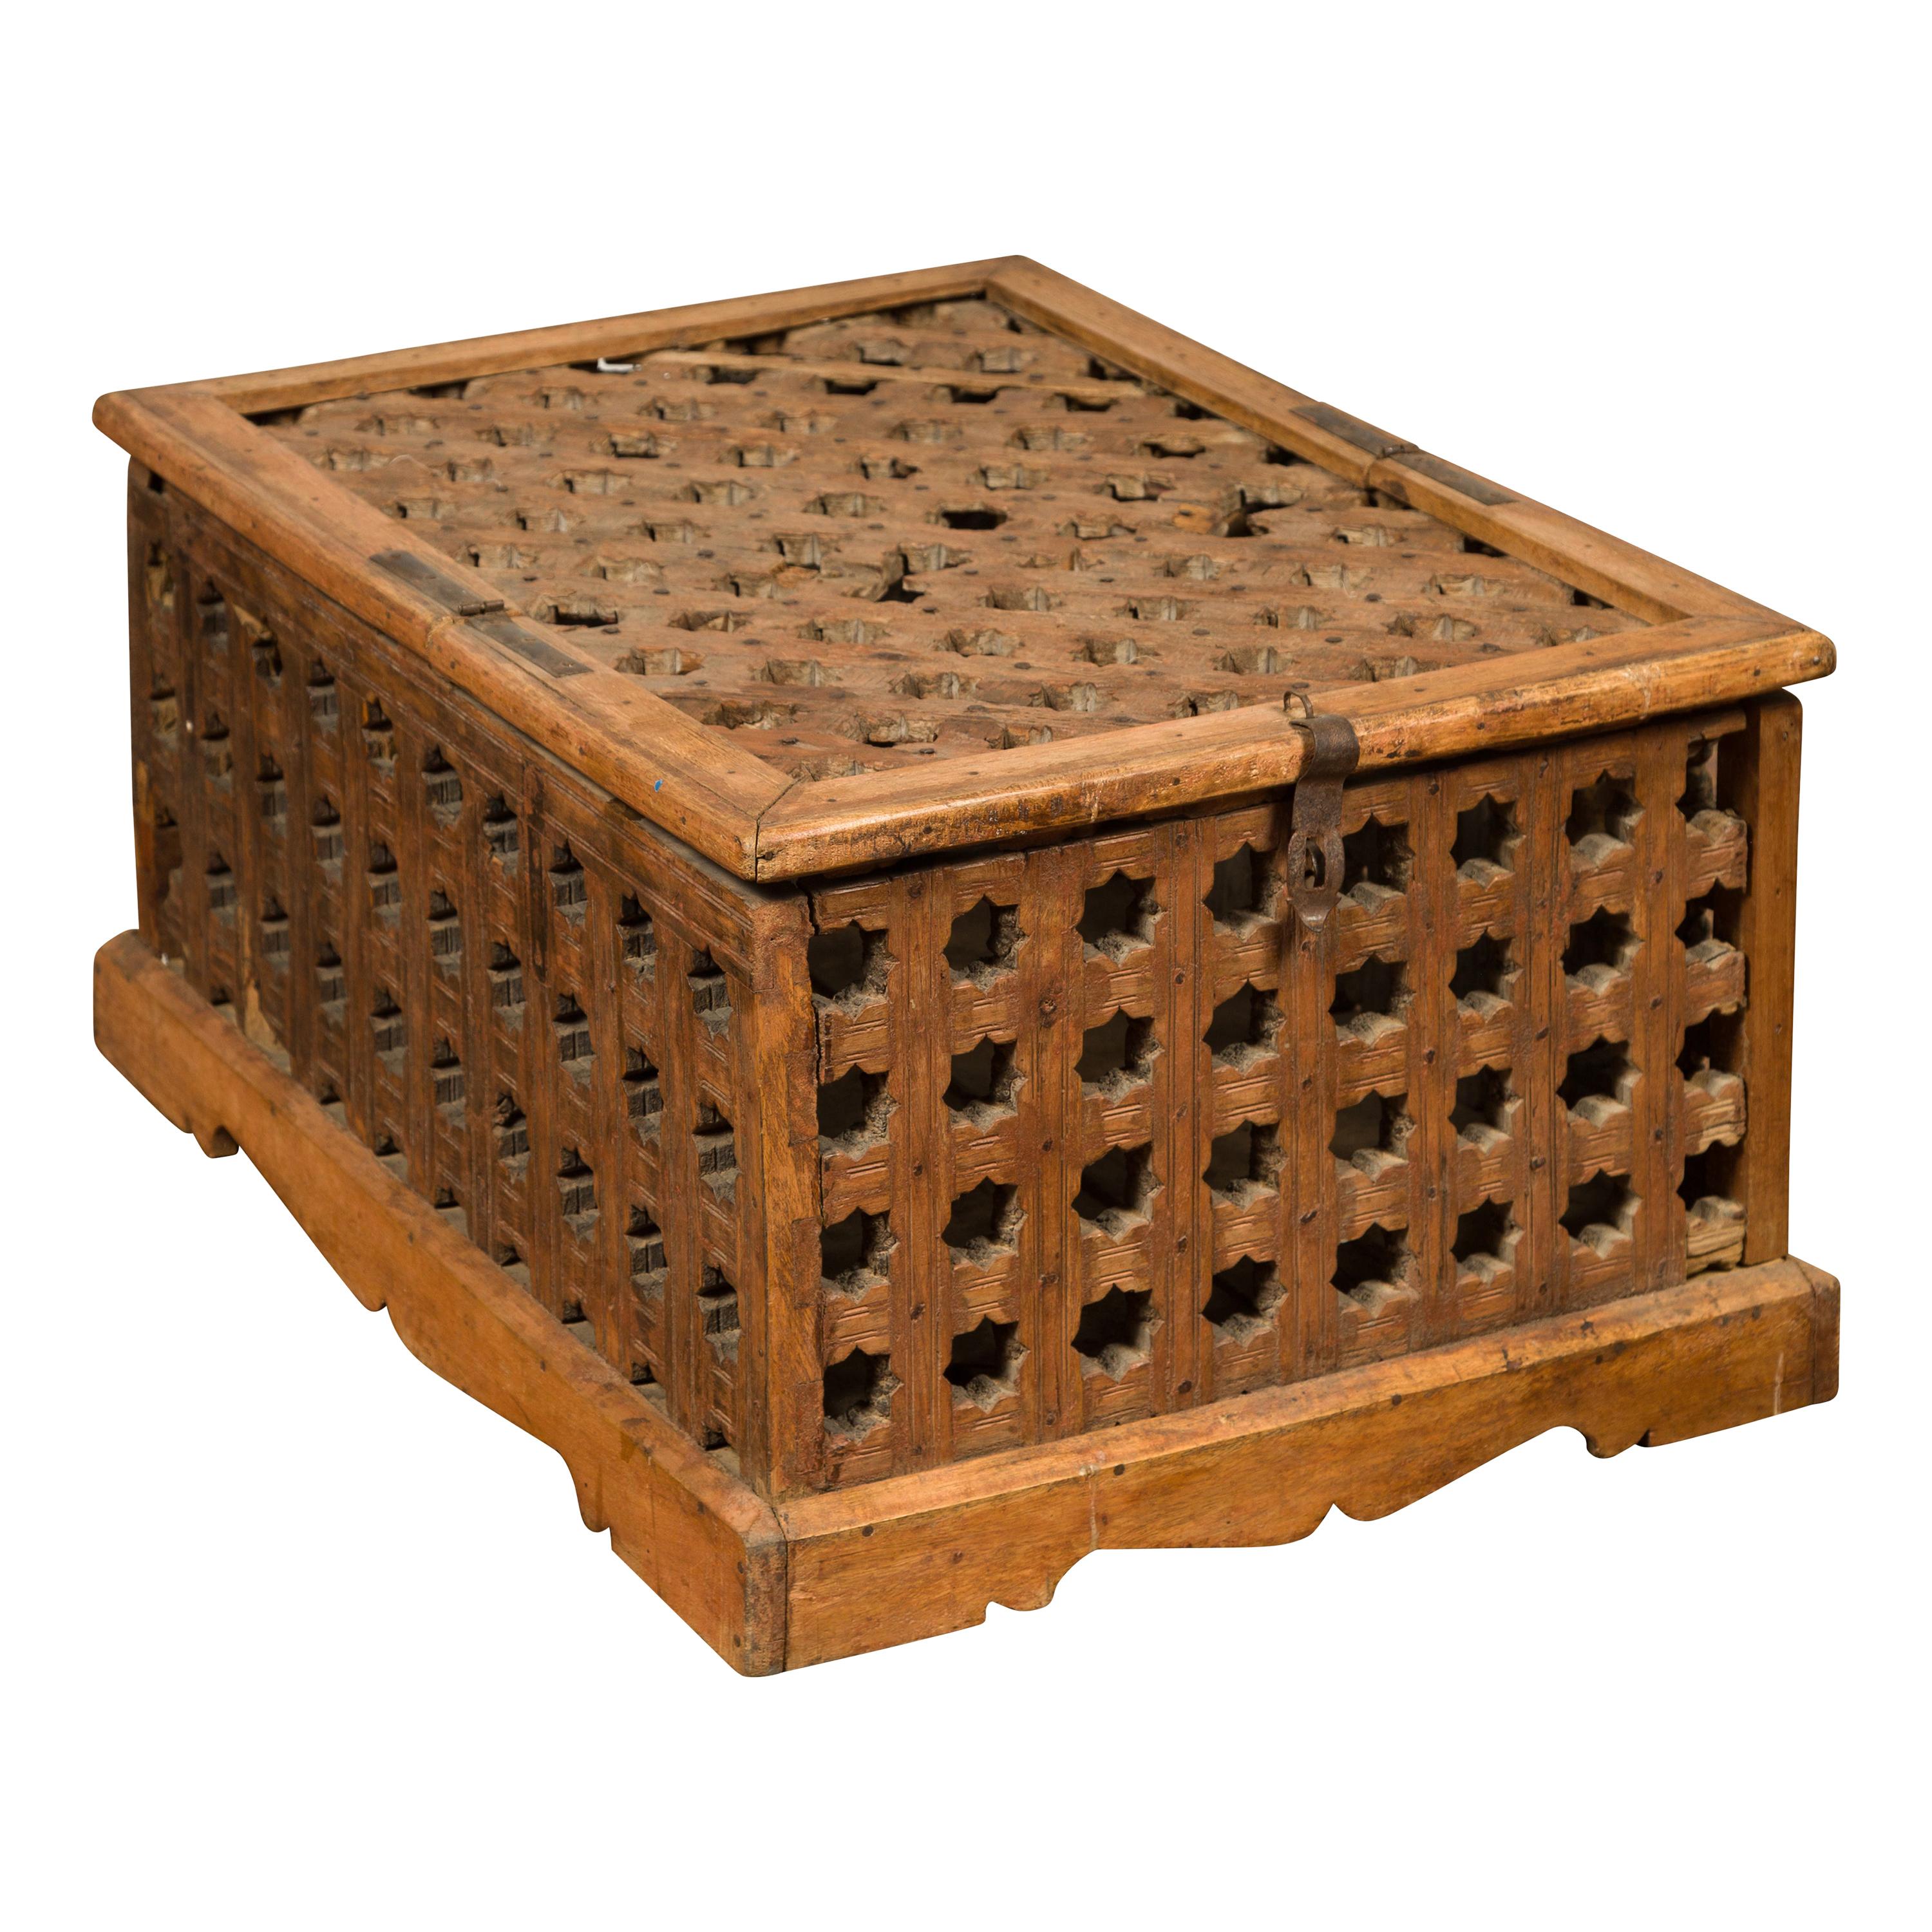 Rustic Indian Antique Food Box with Pierced Star Motifs and Bracketed Plinth